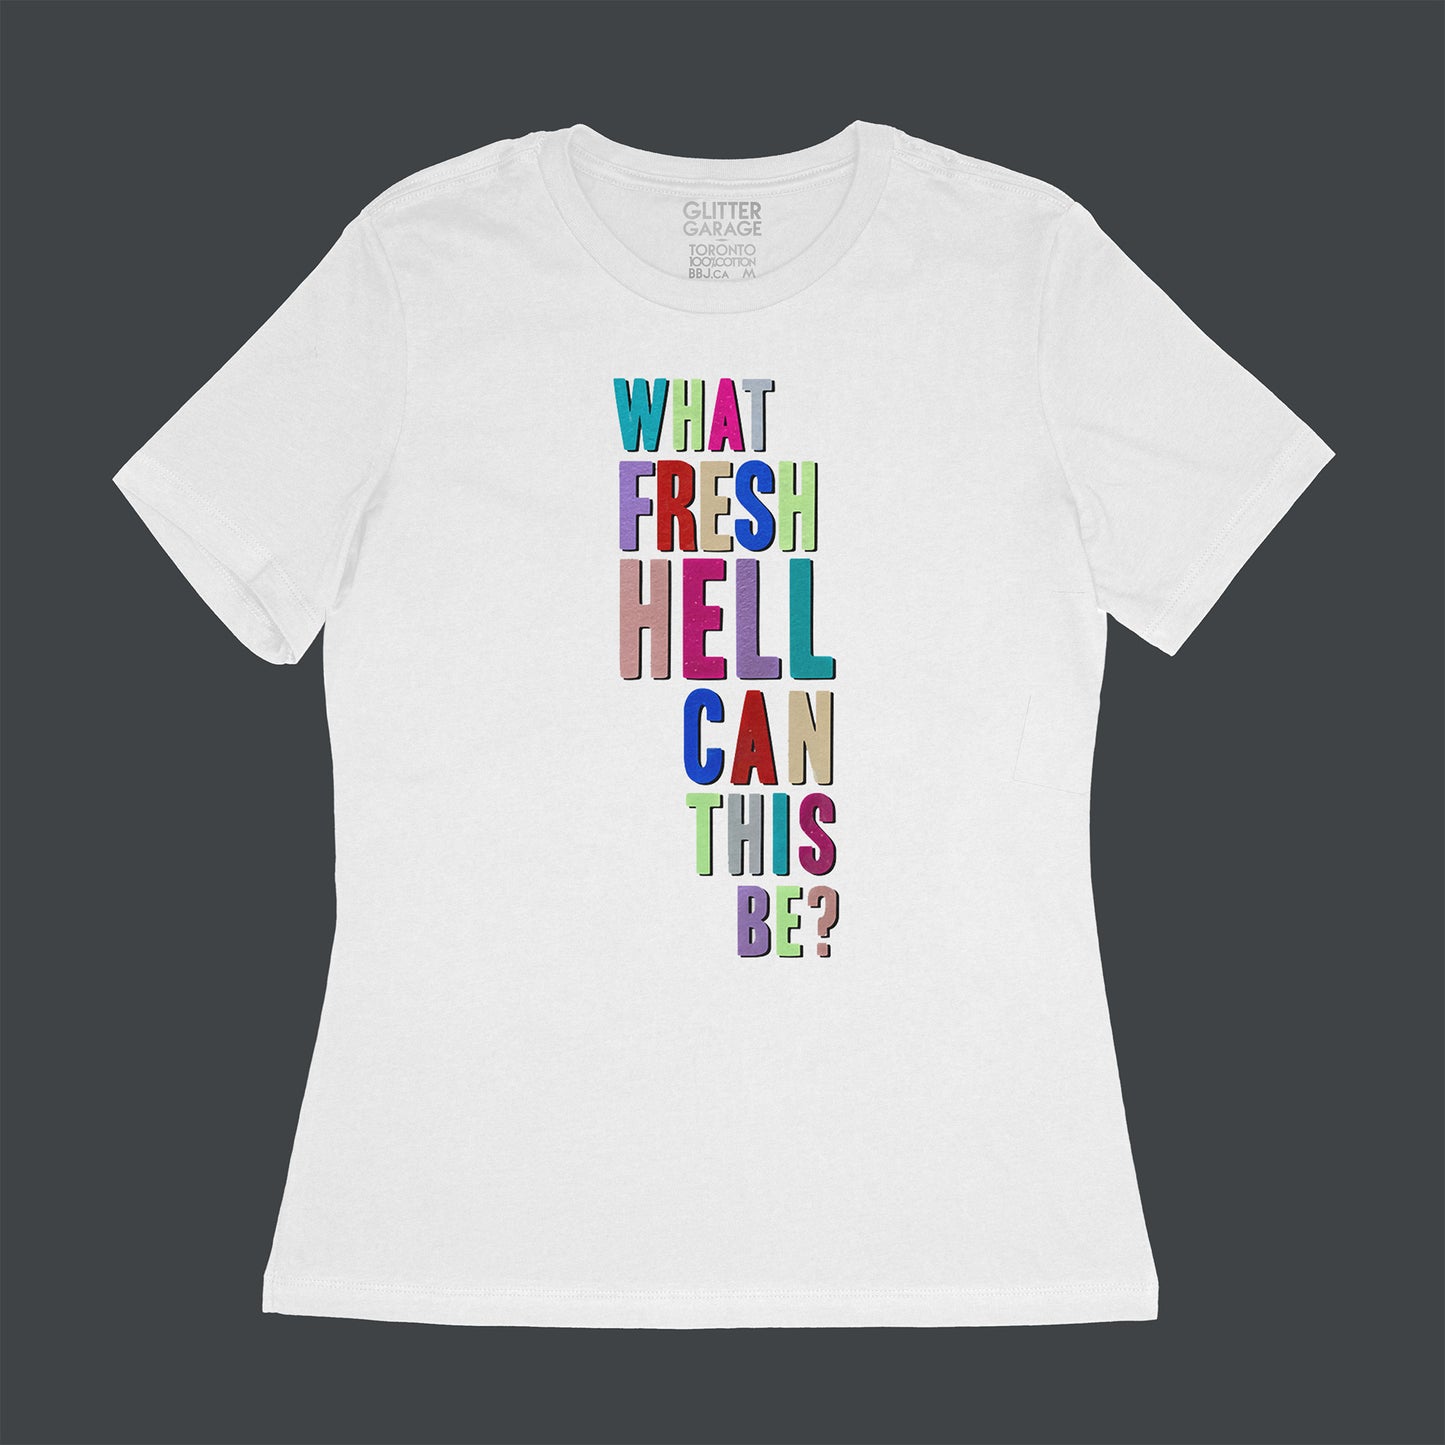 white women's relaxed fit tee shirt with multicolour metallic text "what fresh hell can this be?" by BBJ / Glitter Garage  Edit alt text